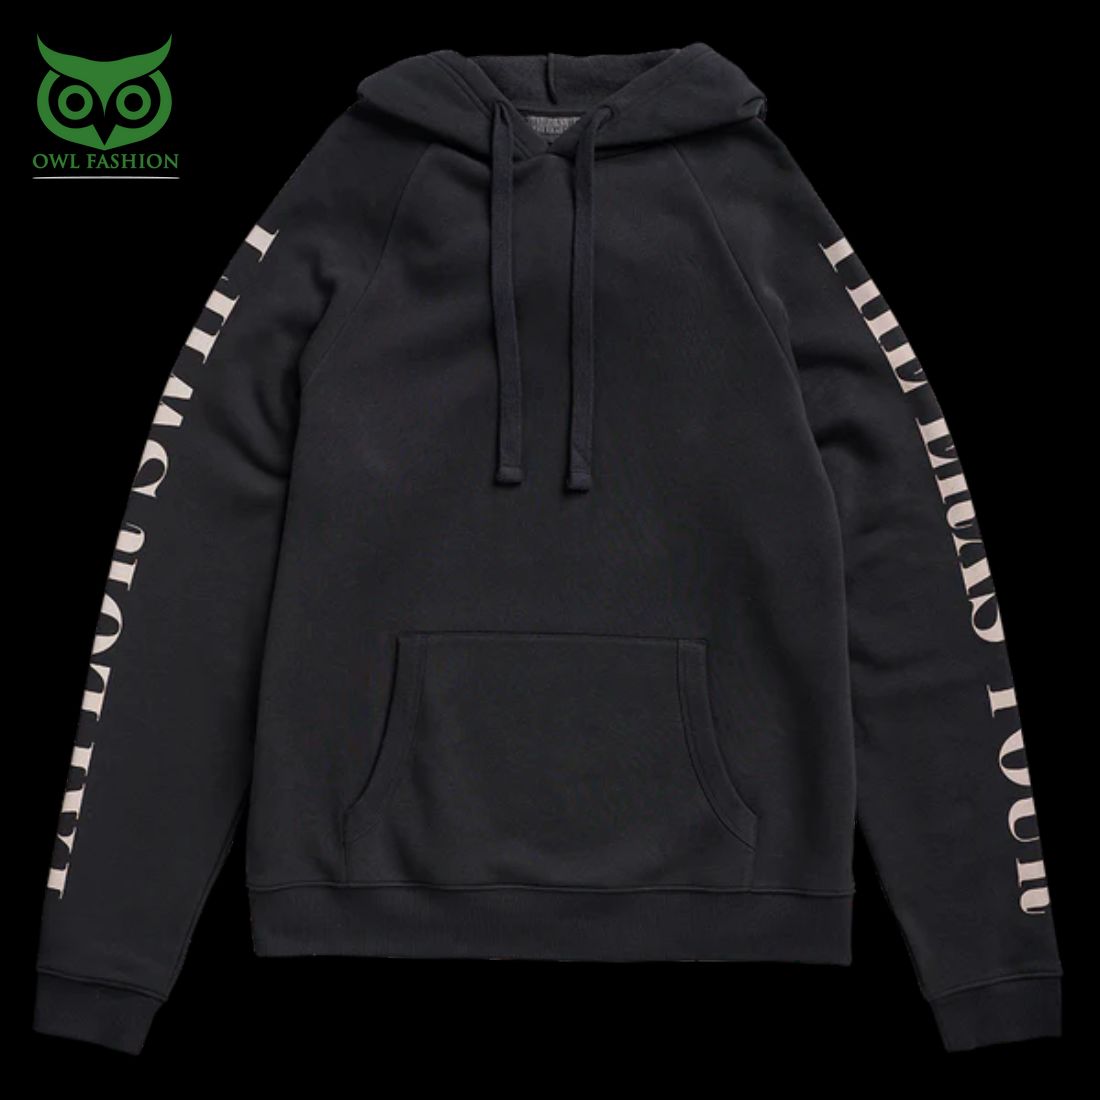 Taylor Swift The Eras Tour Black Hoodie This is awesome and unique